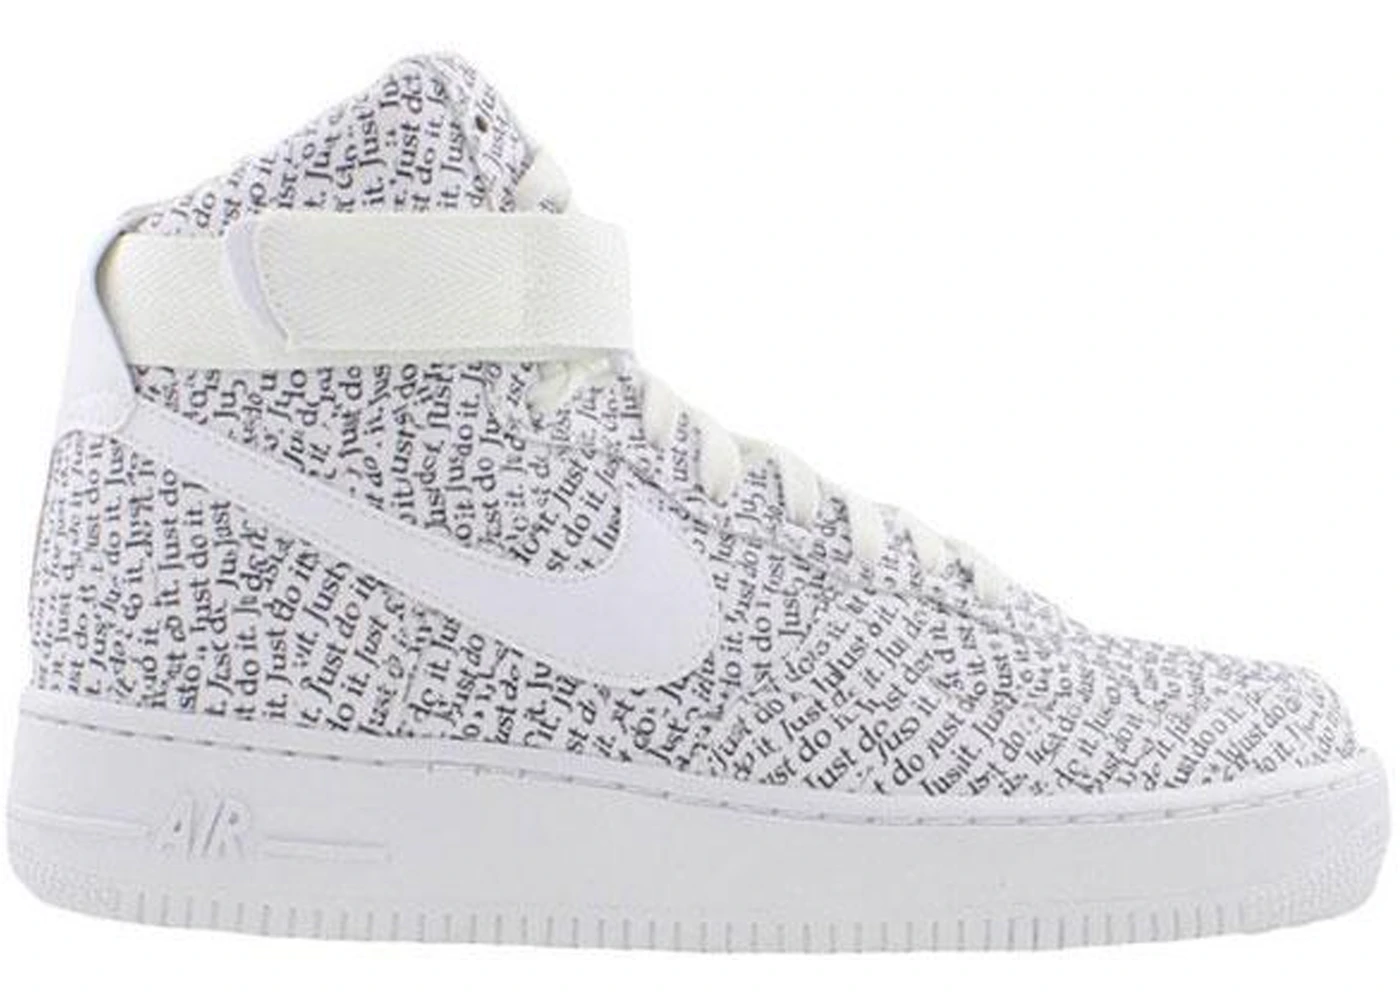 Nike Air Force 1 High Just Do It Pack White Black Men's - AQ9648